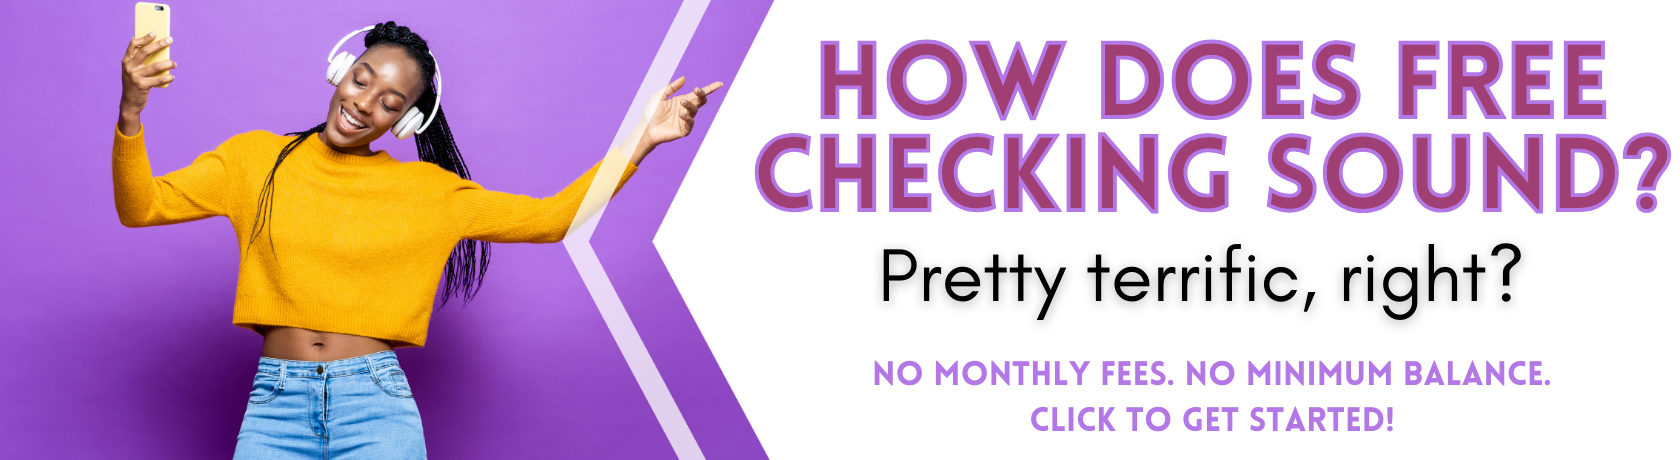 How does free checking sound?
Pretty terrific, right?
No monthly fees. No minimum balances.
Get started.